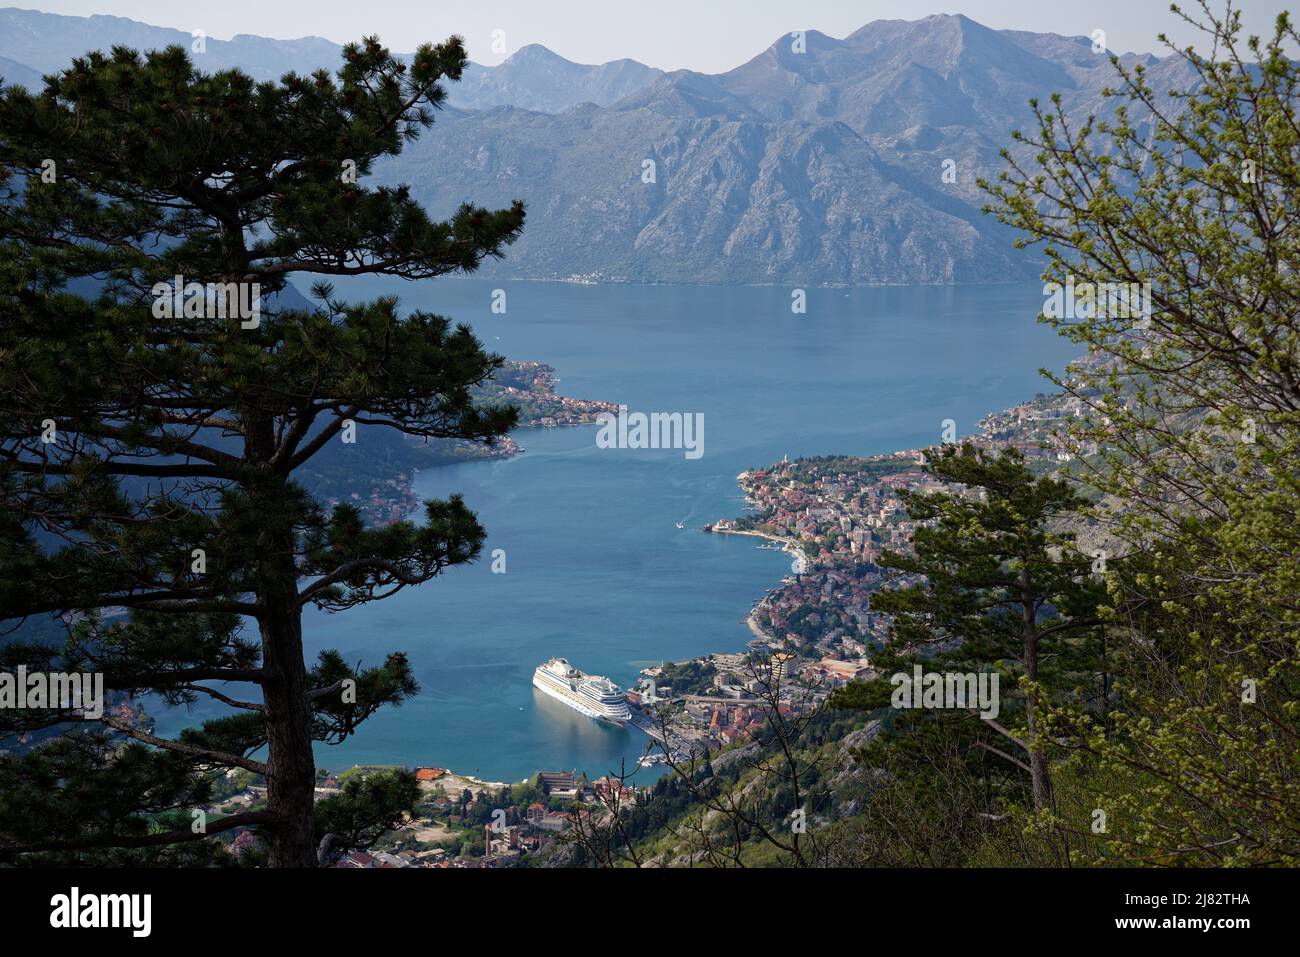 View of the bay of Kotor, Montenegro. Cruise ship at Kotor. Villages and the town of Kotor at the edge of the sea with dramatic surrounding mountains. Stock Photo